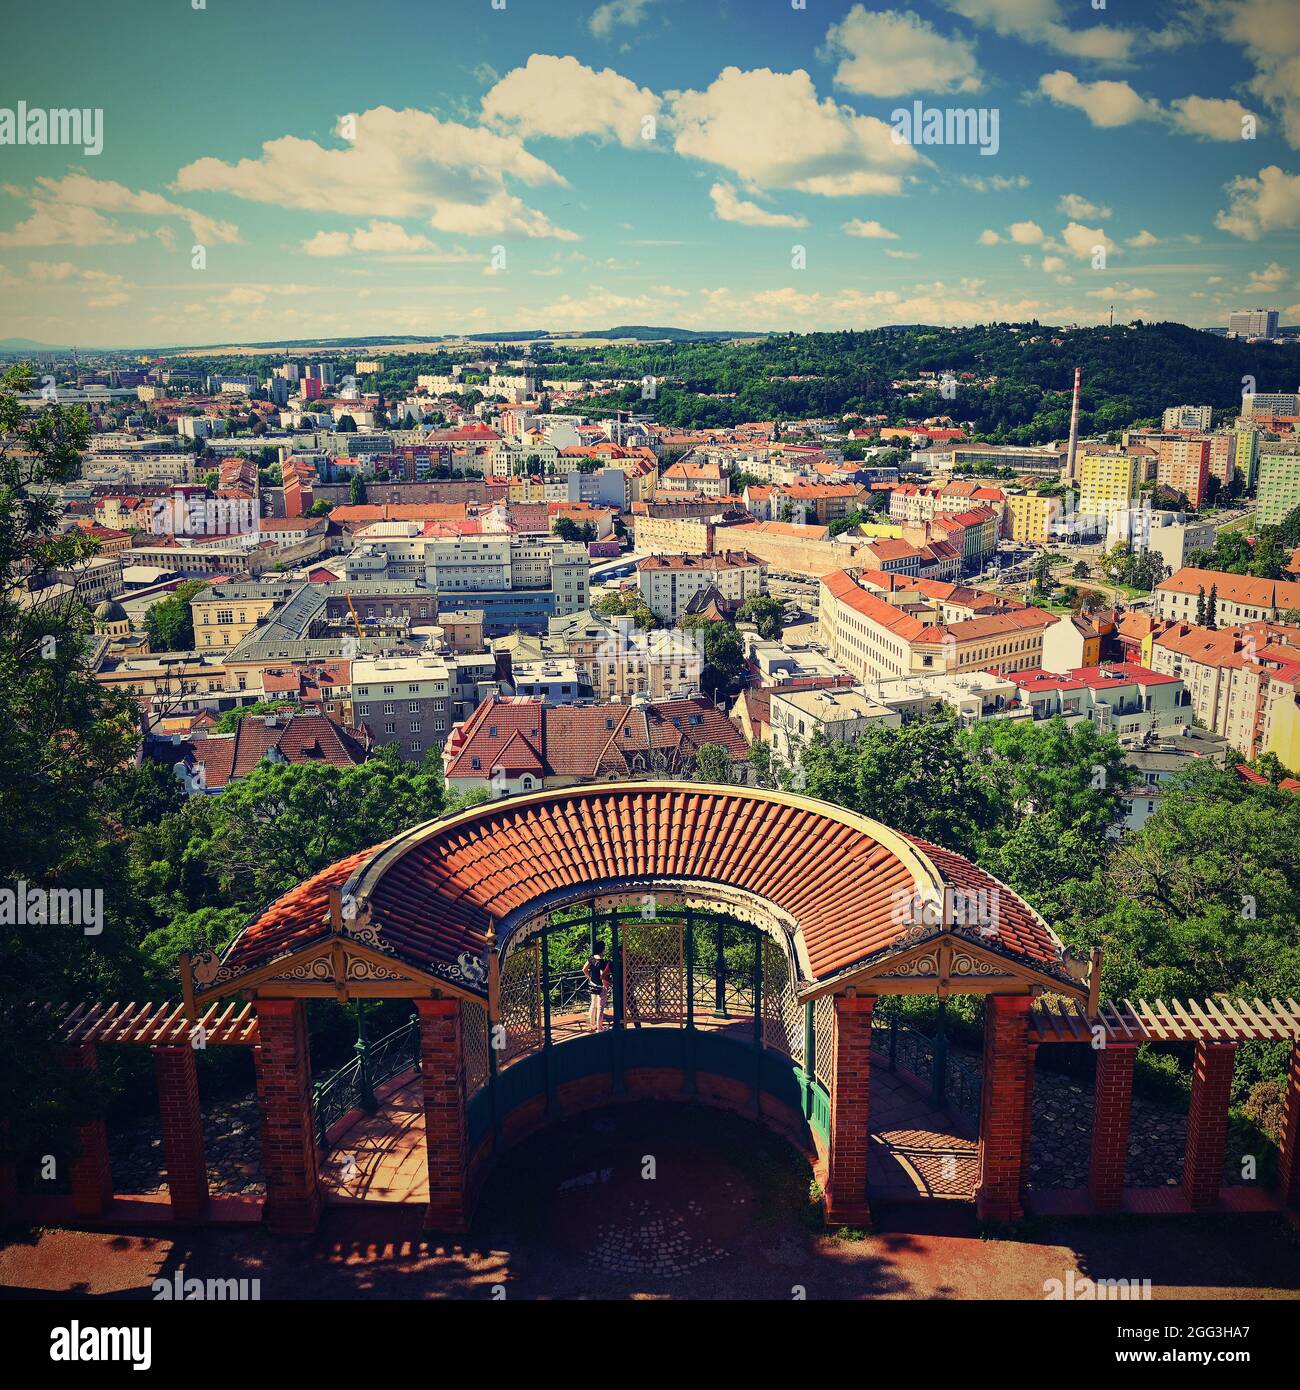 City of Brno - Czech Republic - Europe. Beautiful views of the city and houses on a sunny summer day. Stock Photo